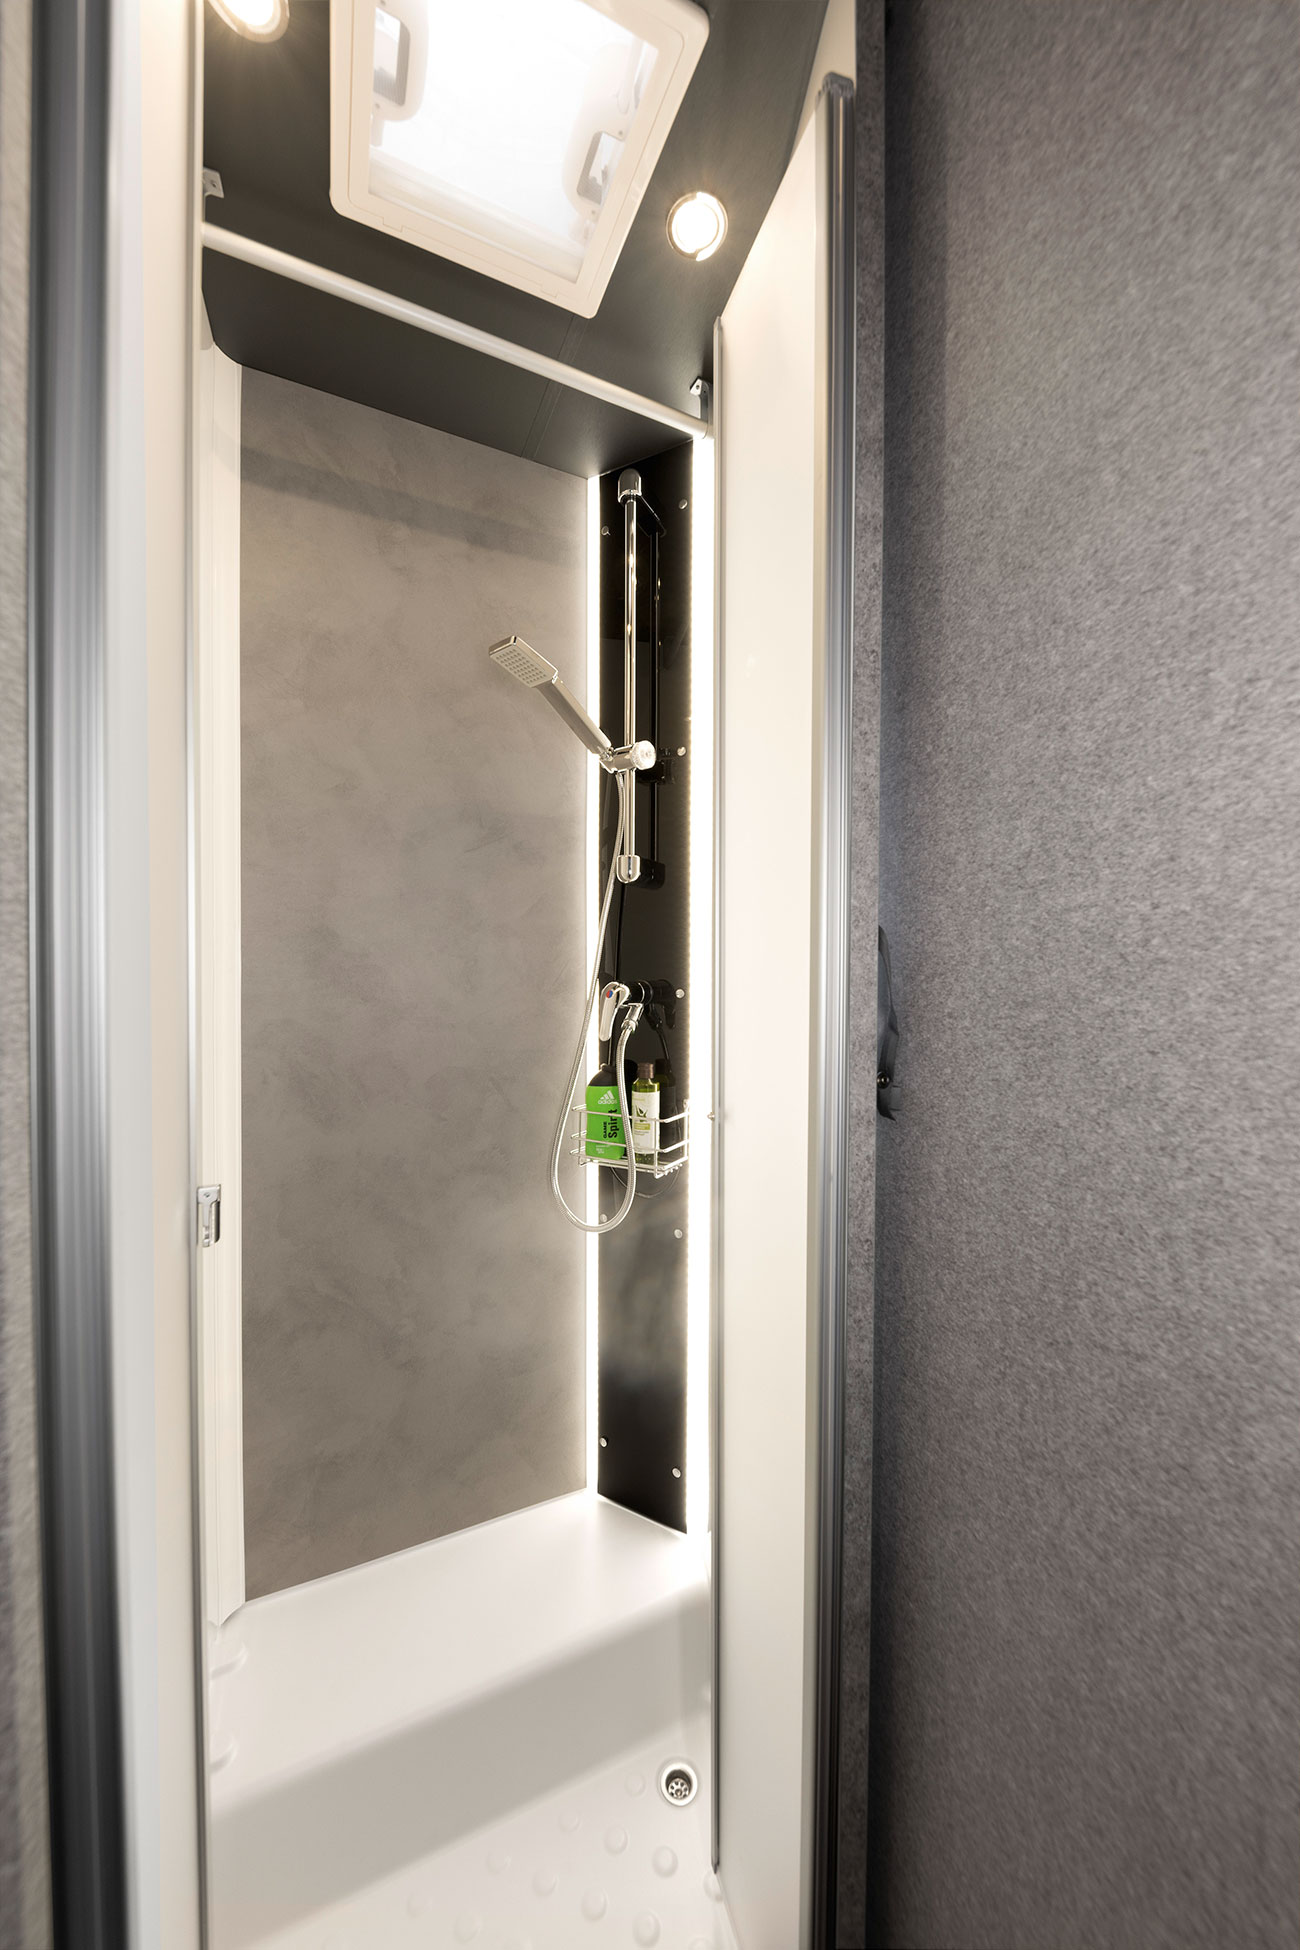 The shower combines plenty of elbow room with an elegant design. The backlit shower equipment is part of the Light Moments ambient lighting system.